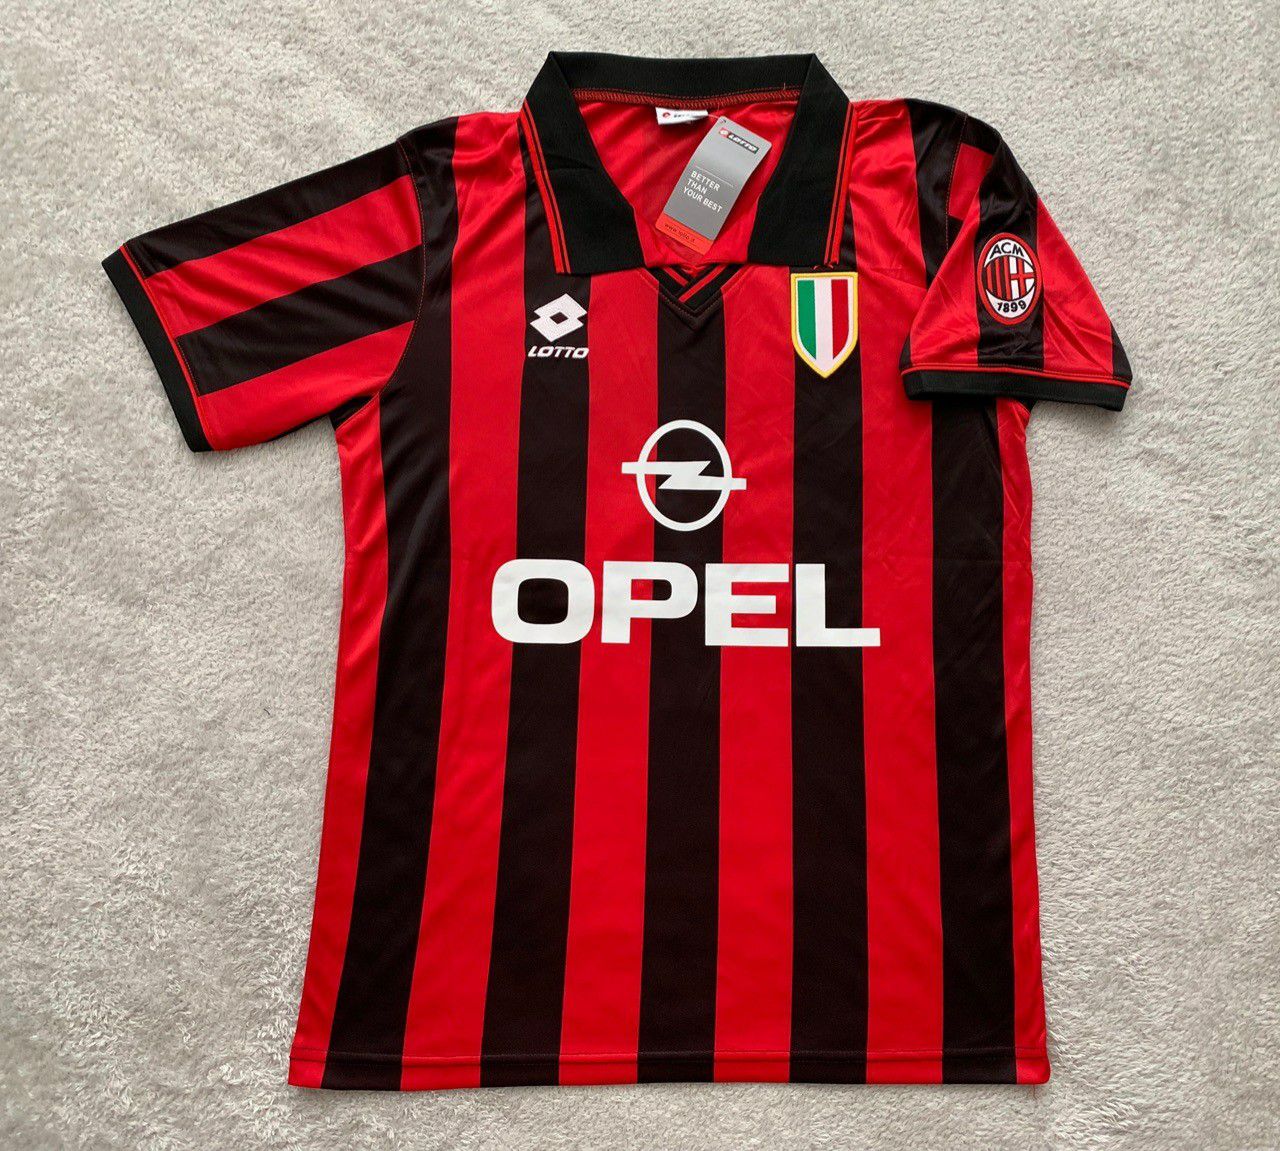 Roberto Baggio AC Milan Soccer Team New Men's Home Retro Vintage Soccer Jersey - Size M and L